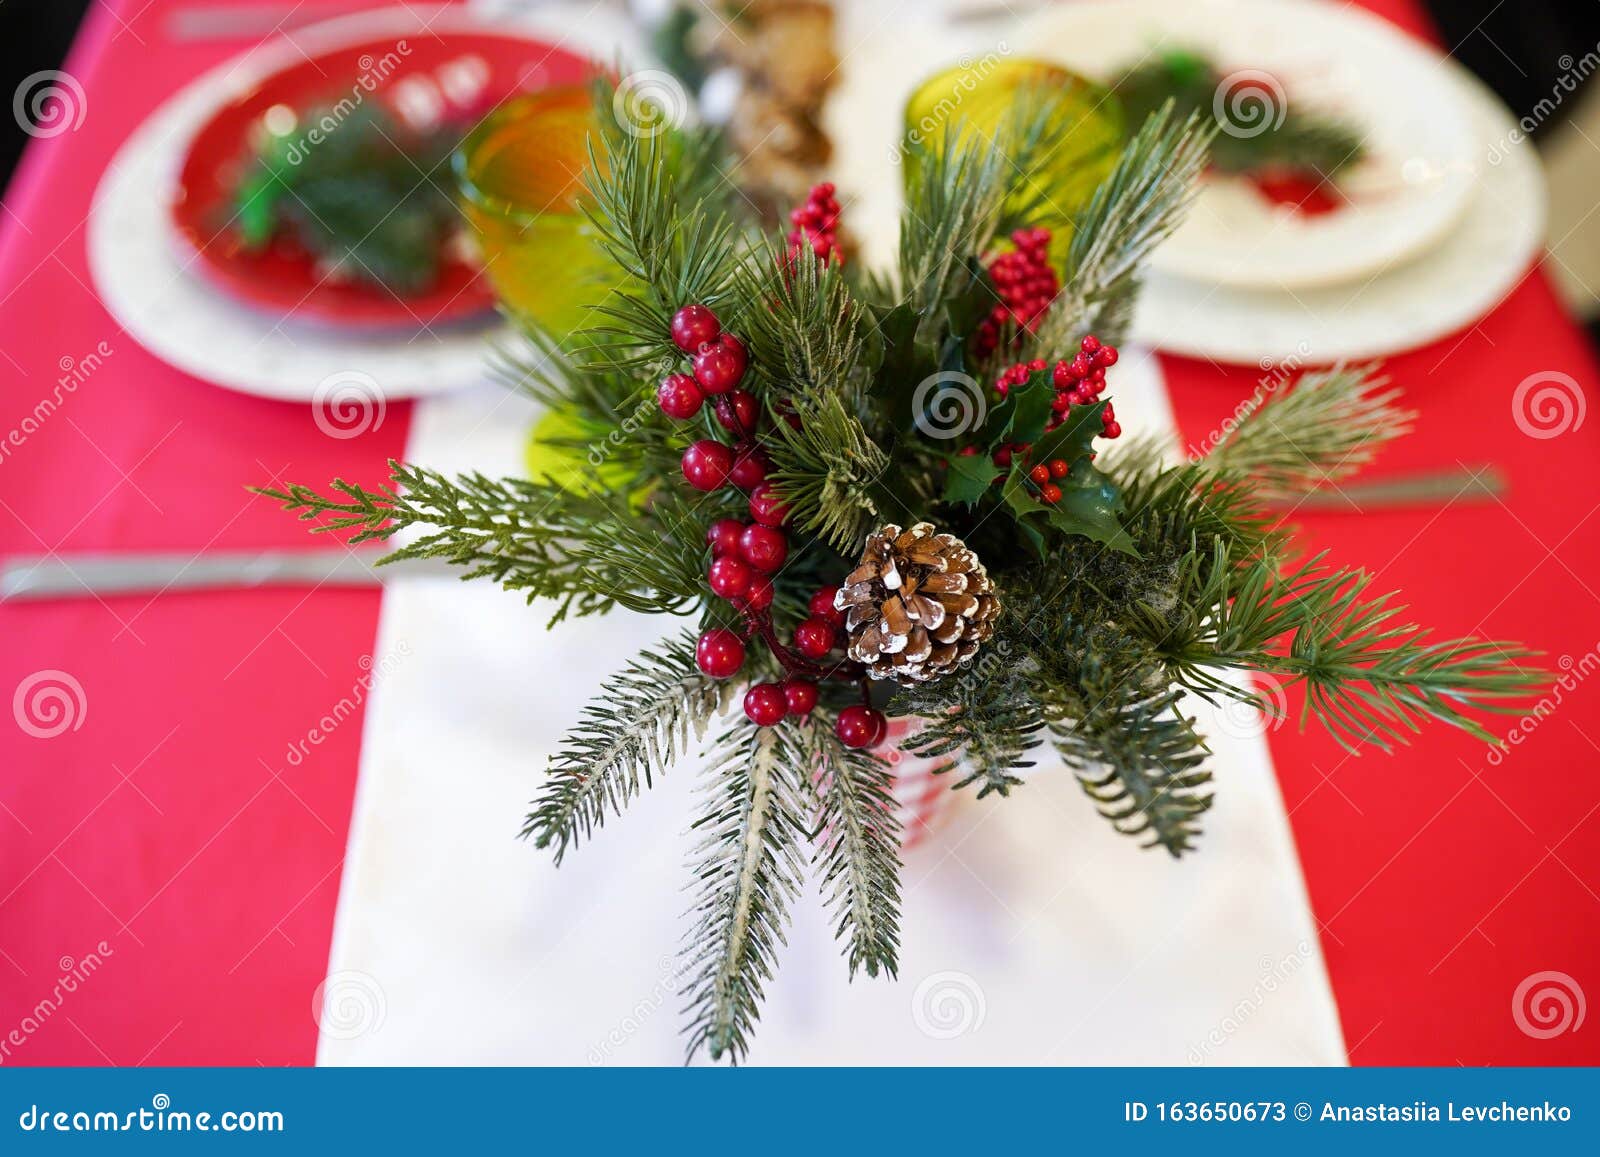 Christmas Dinner Background with Rustic Decorations. View from Above ...